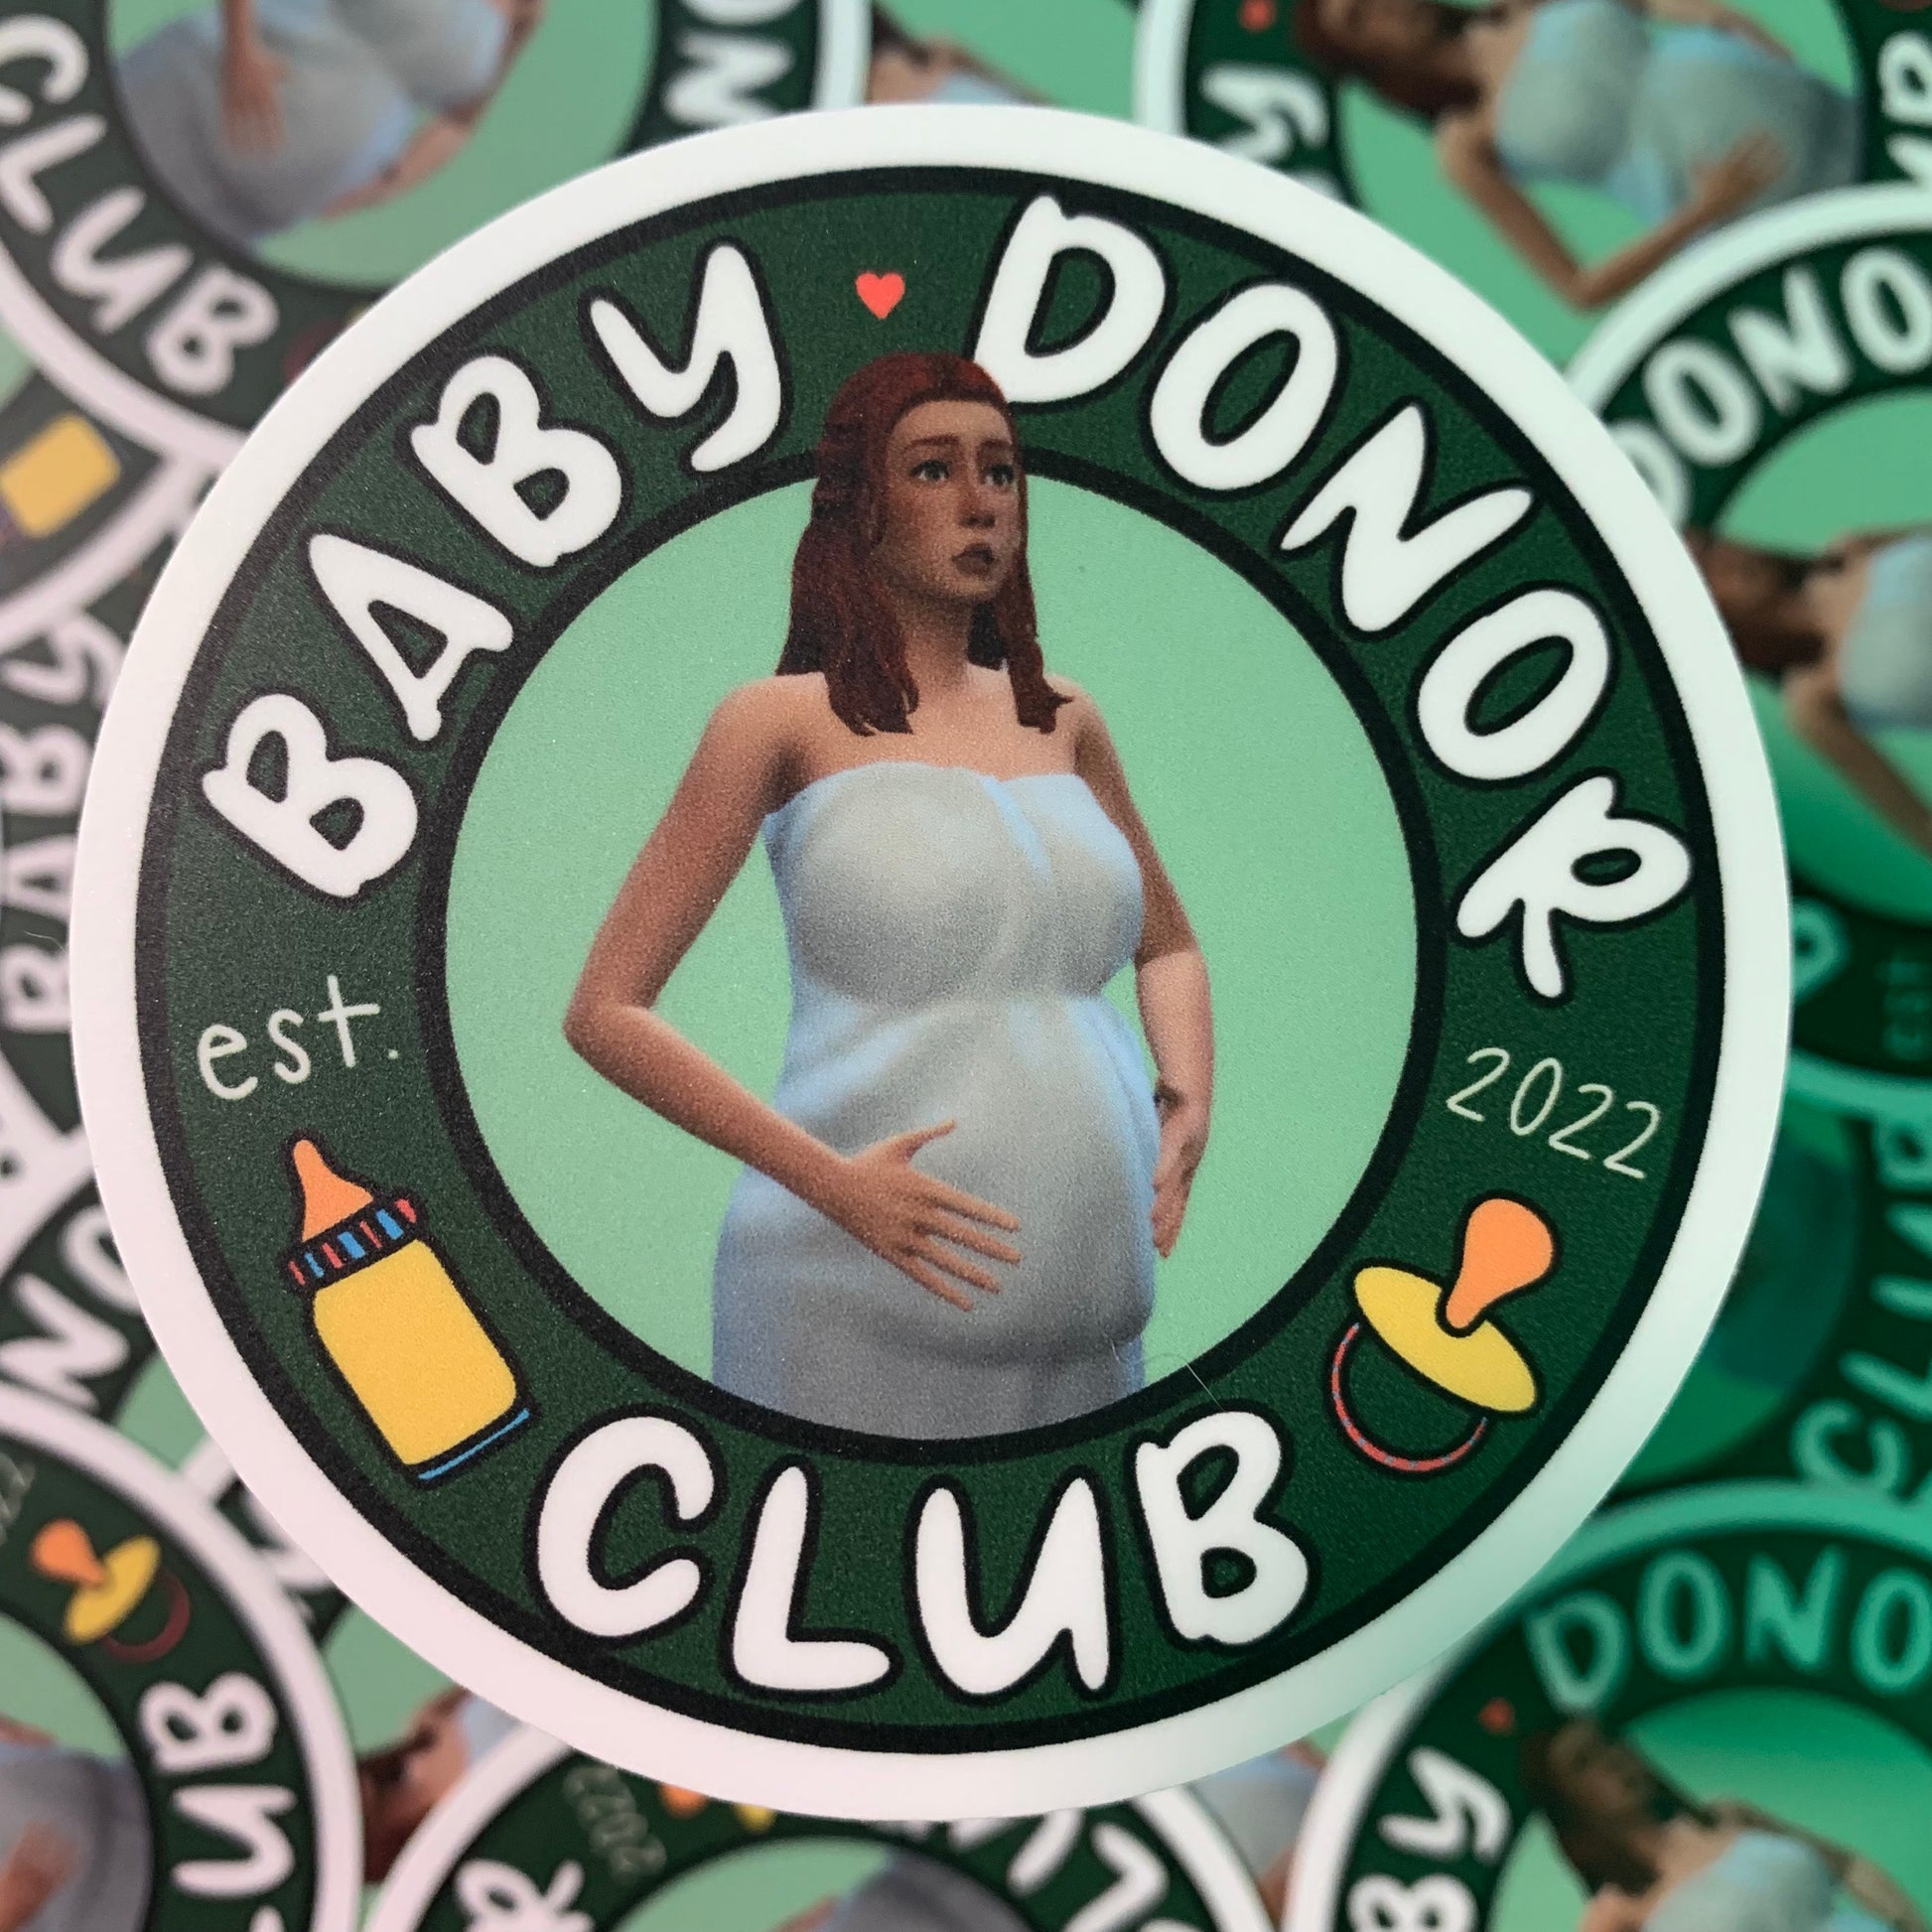 A circular sticker design with BABY DONOR CLUB written on it, with an image of "Hot Donna" in the middle. (Hot Donna is the matriarch from Bella's 100 baby challenge). There is also a small drawing of a baby bottle and a pacifier as well as est. 2022 on the design.